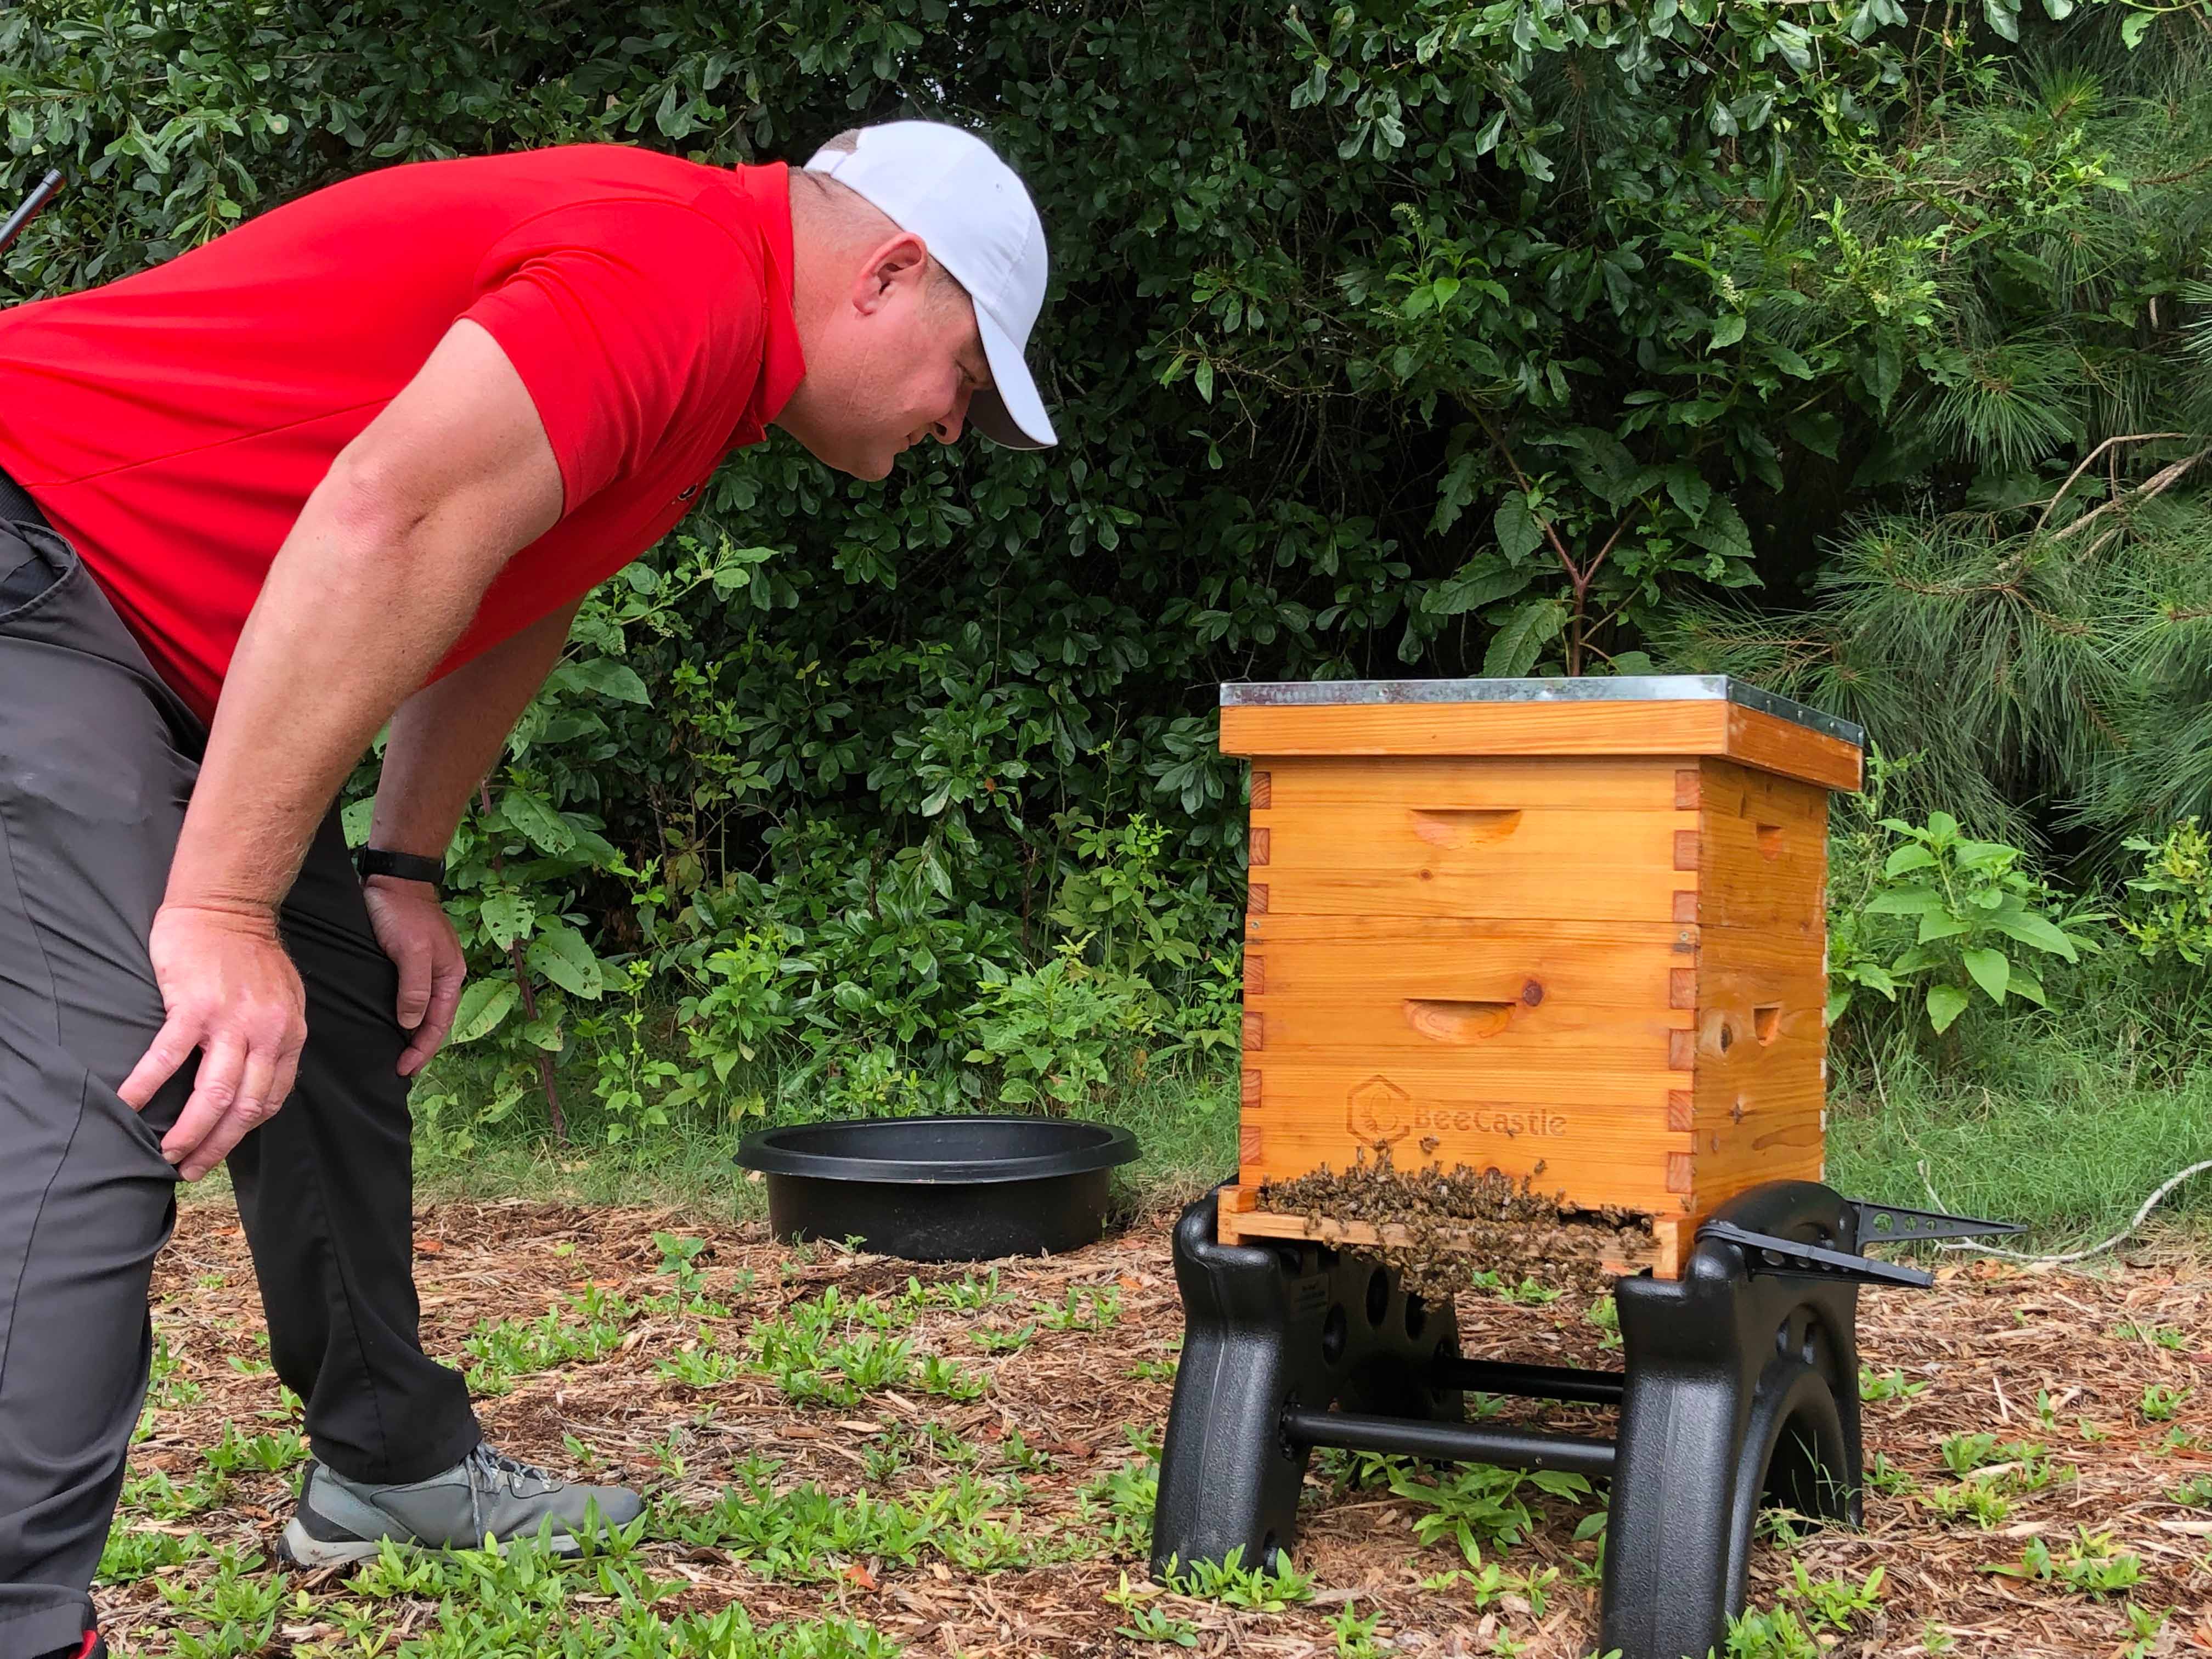 The BEE Team at the UGA Golf Course Brings Awareness to Bee Pollination